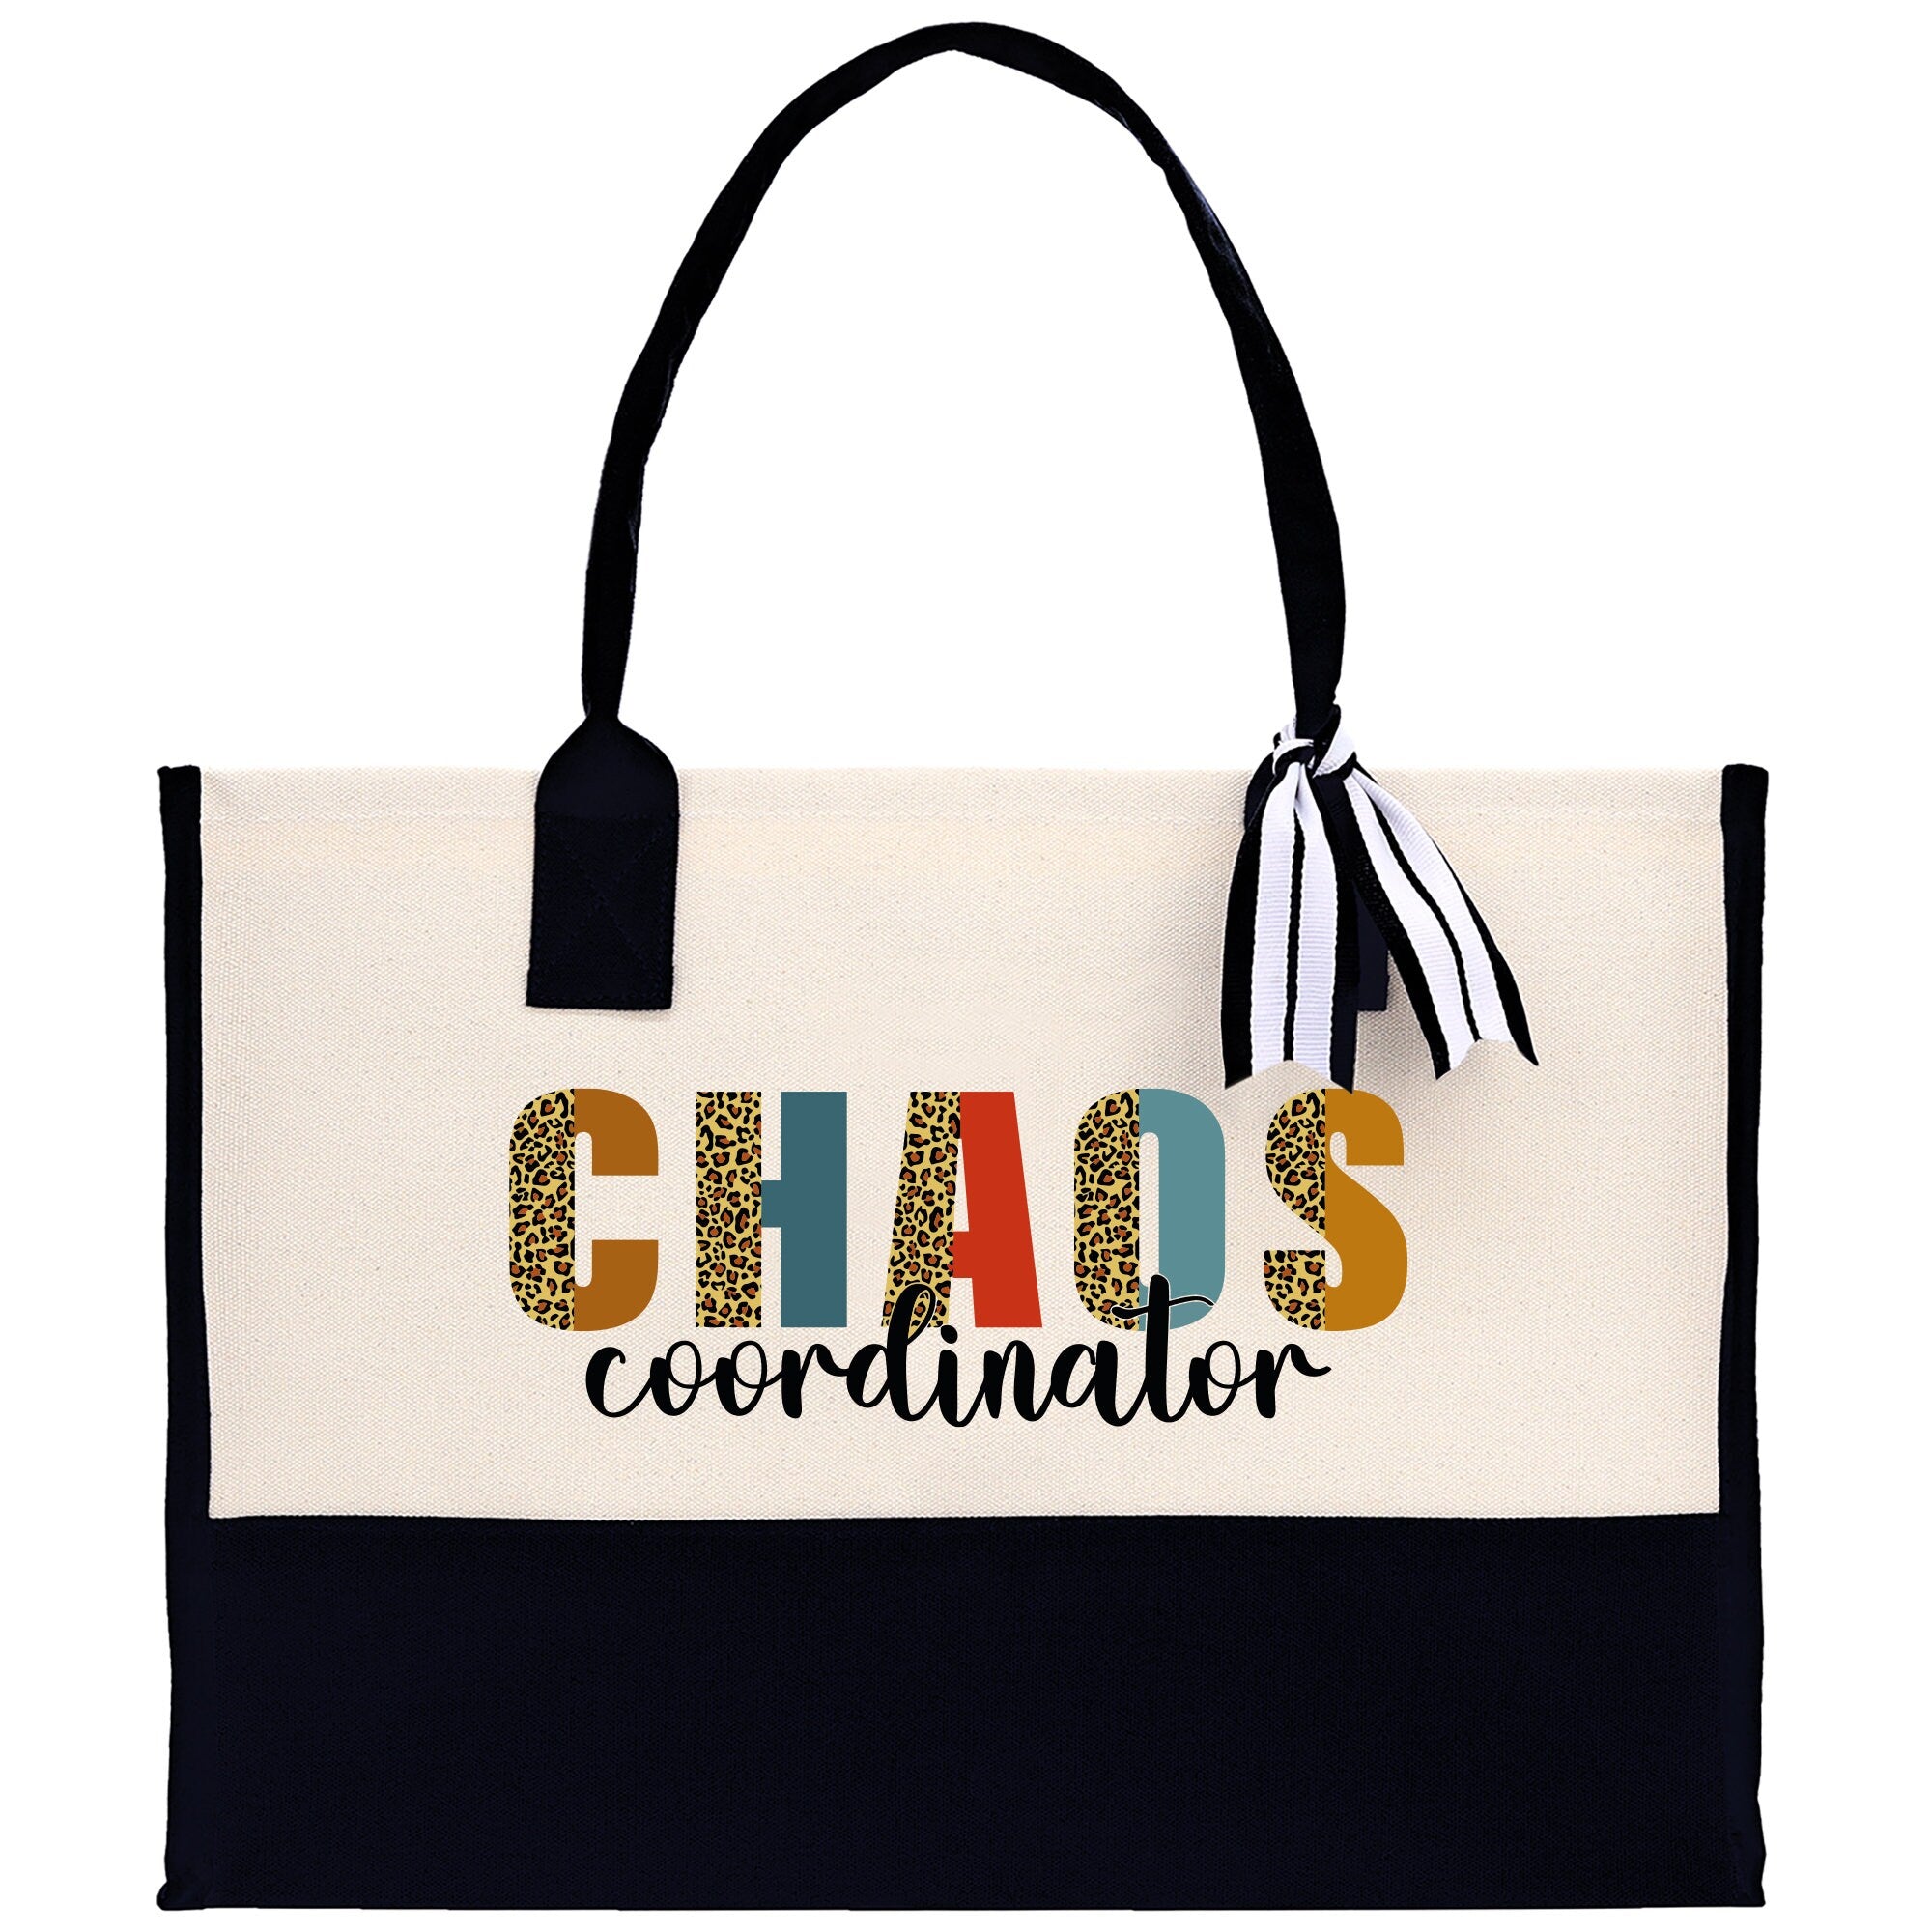 a black and white bag with the word chaos coordination printed on it